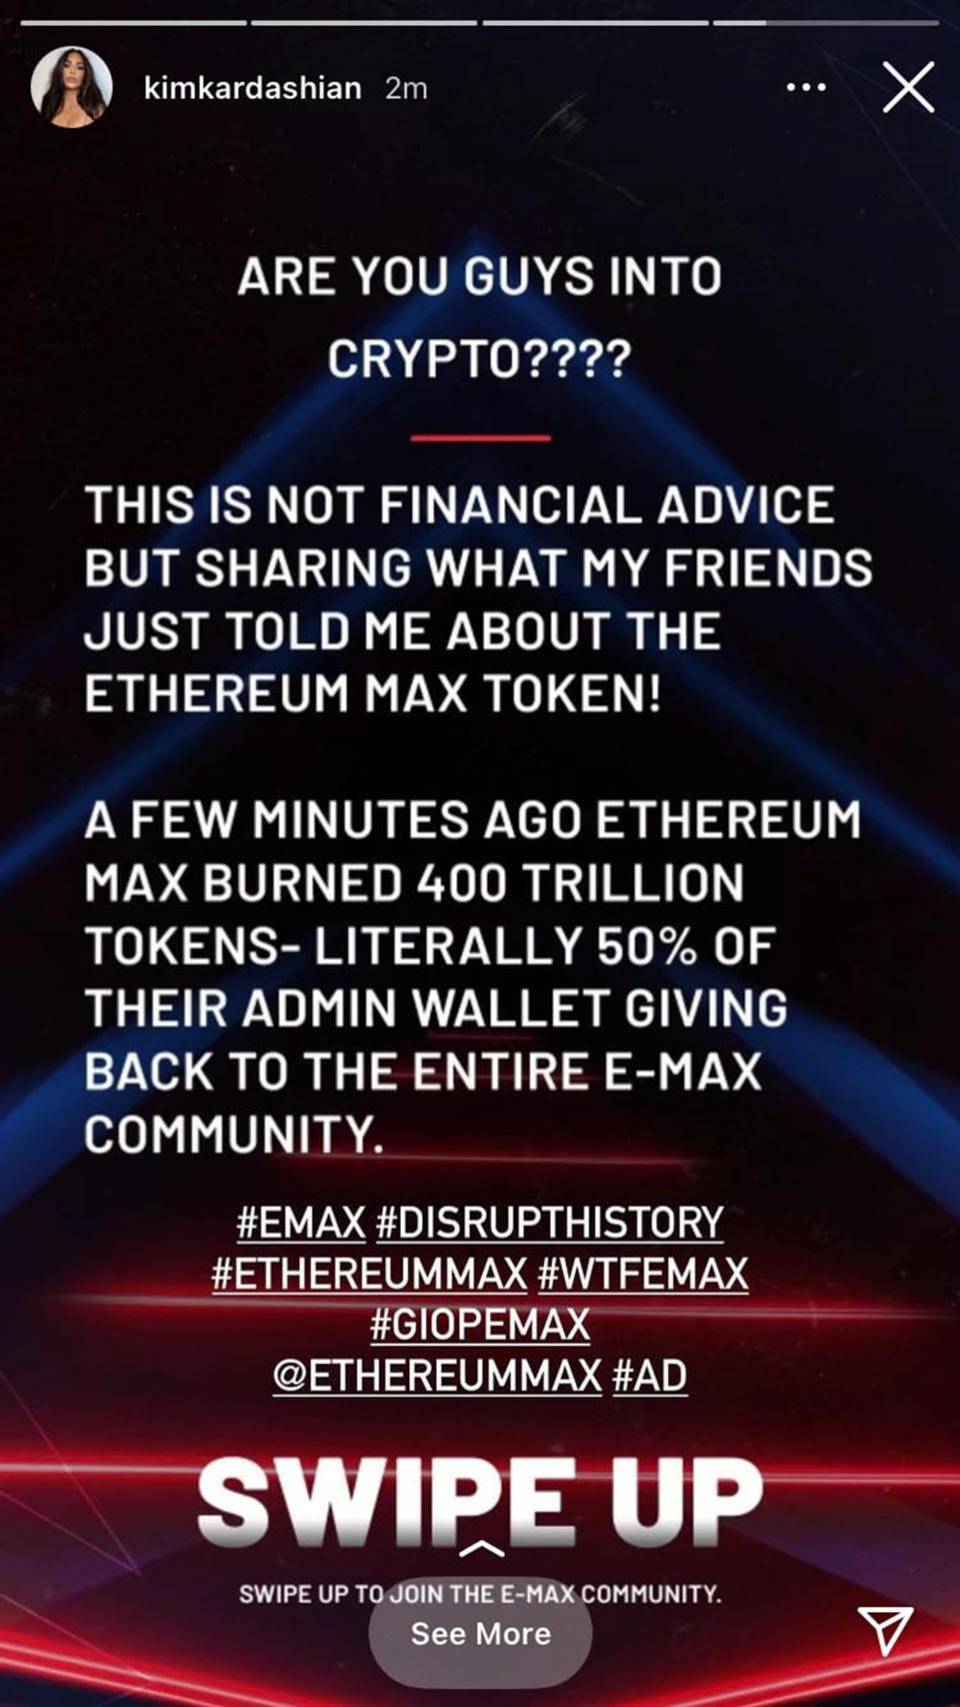 Kim Kardashian promoted the cryptocurrency Ethereum Max on her Instagram account in June.